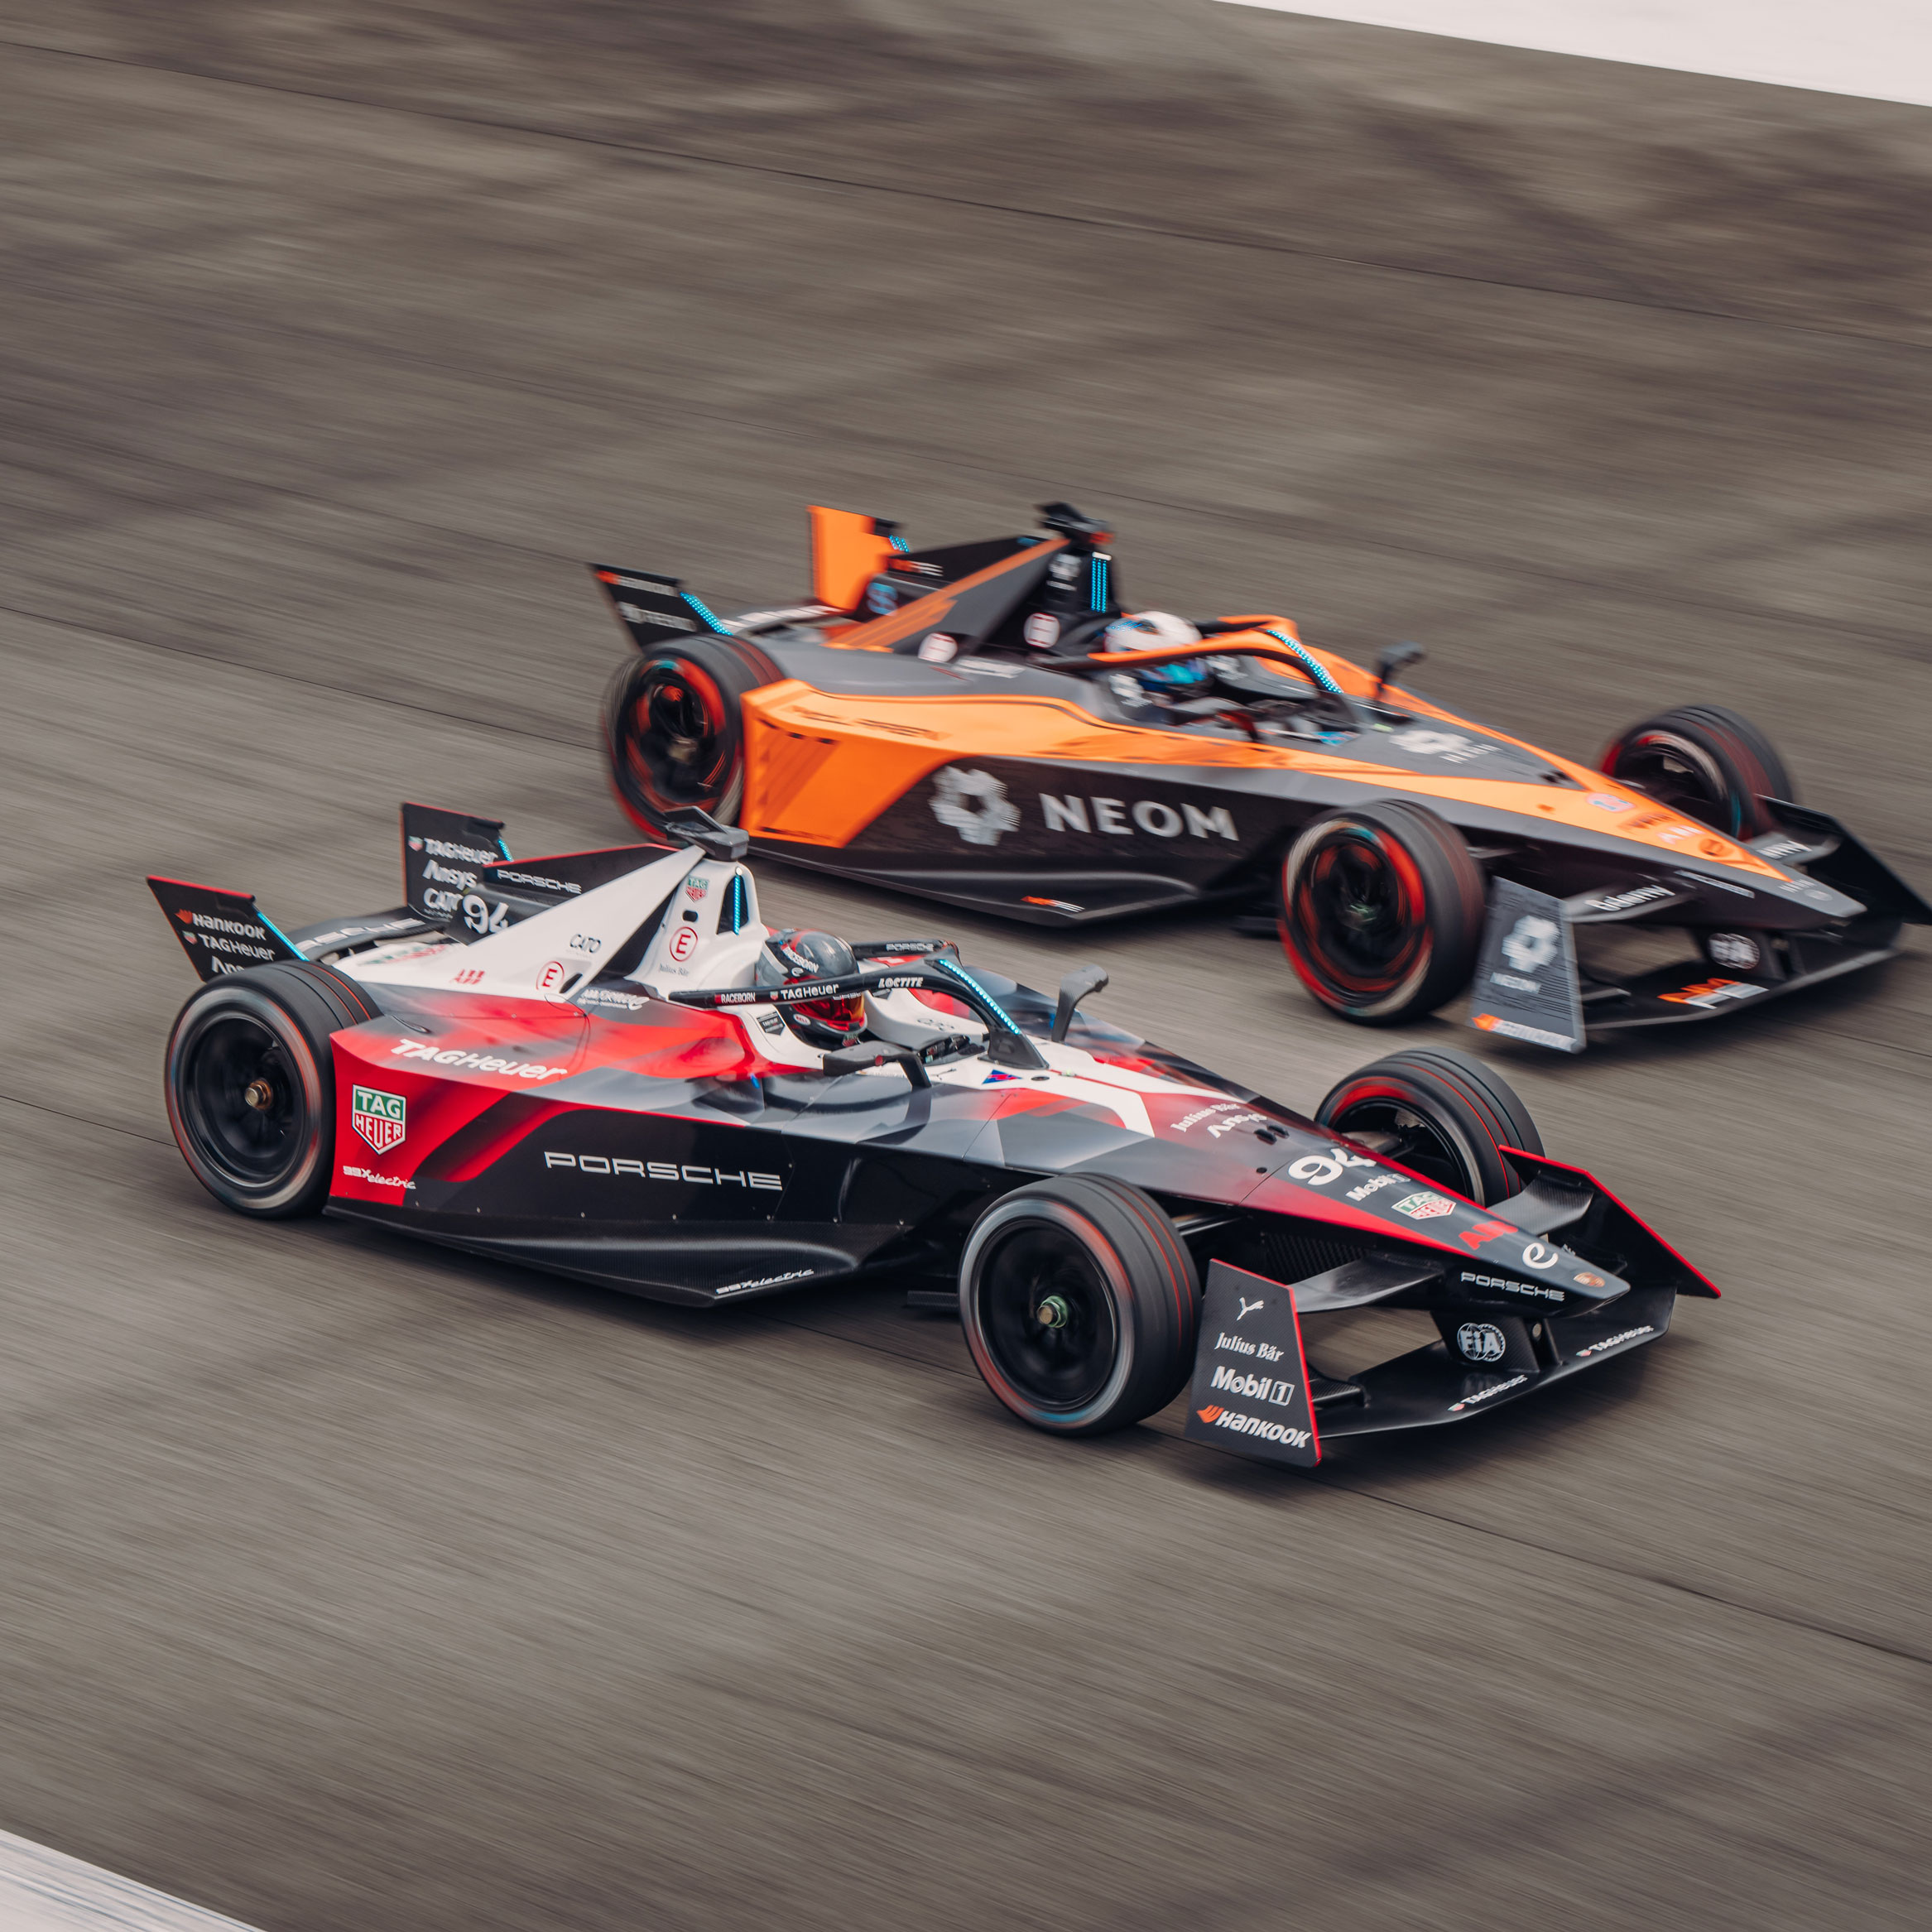 WEHRLEIN SURVIVES FRONT END DAMAGE TO TAKE A FIGHTING P4 IN PORTLAND